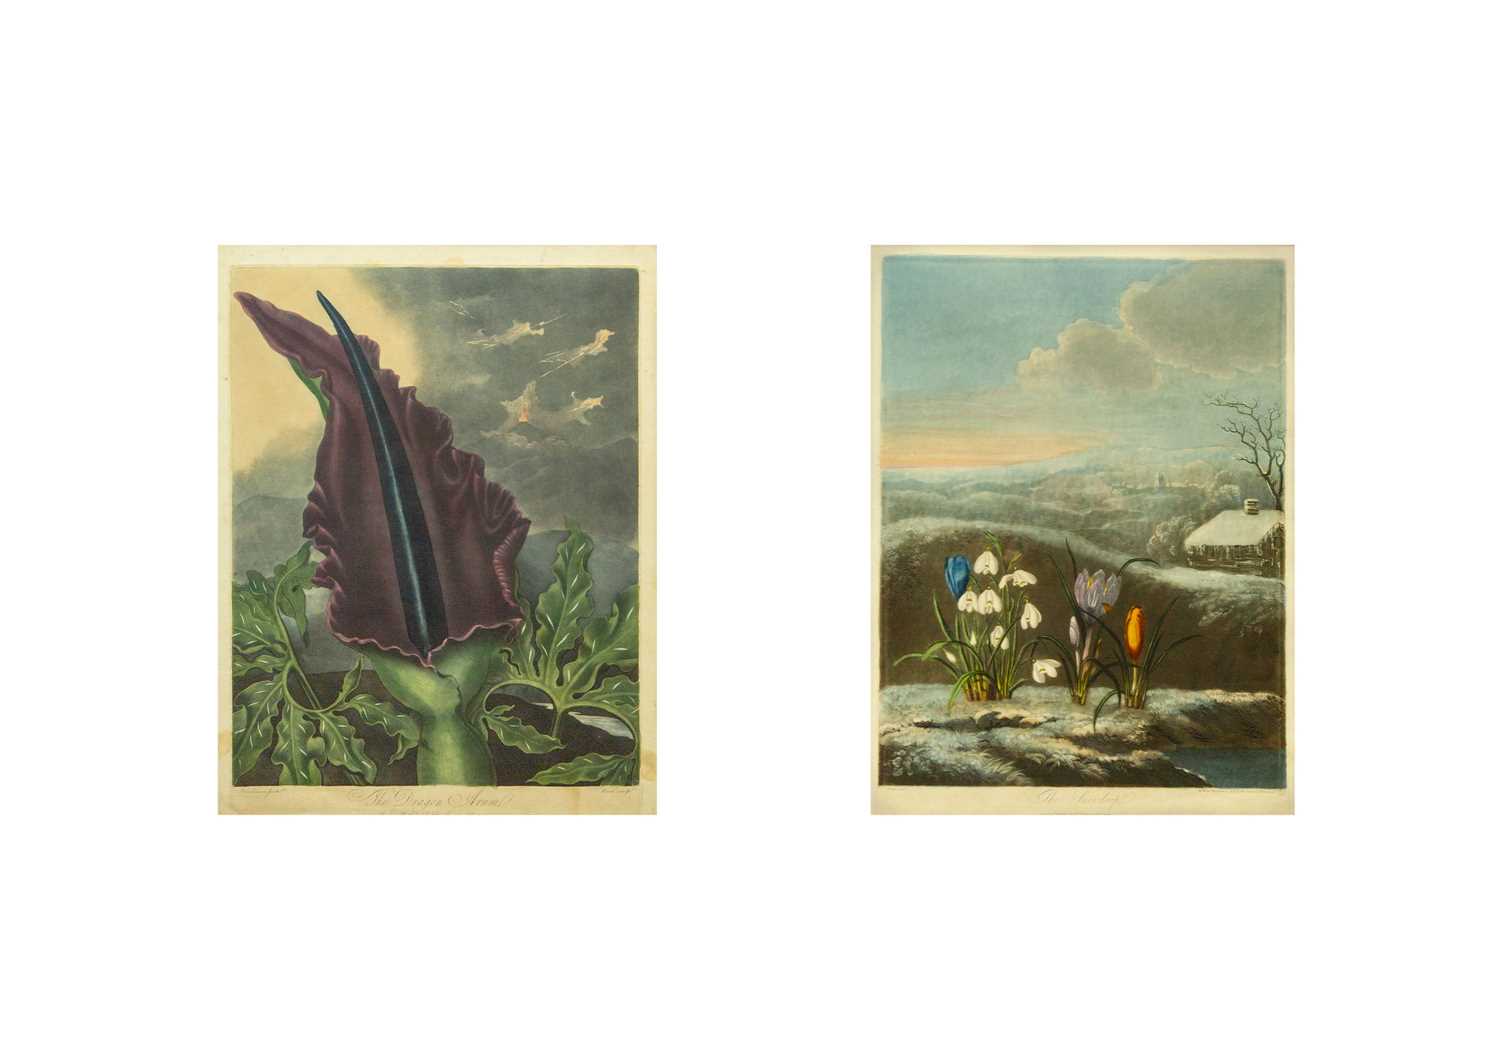 Robert John THORNTON (1768-1837) 'The Snowdrop' and 'The Dragon Arum' (From 'The Temple of Flora')